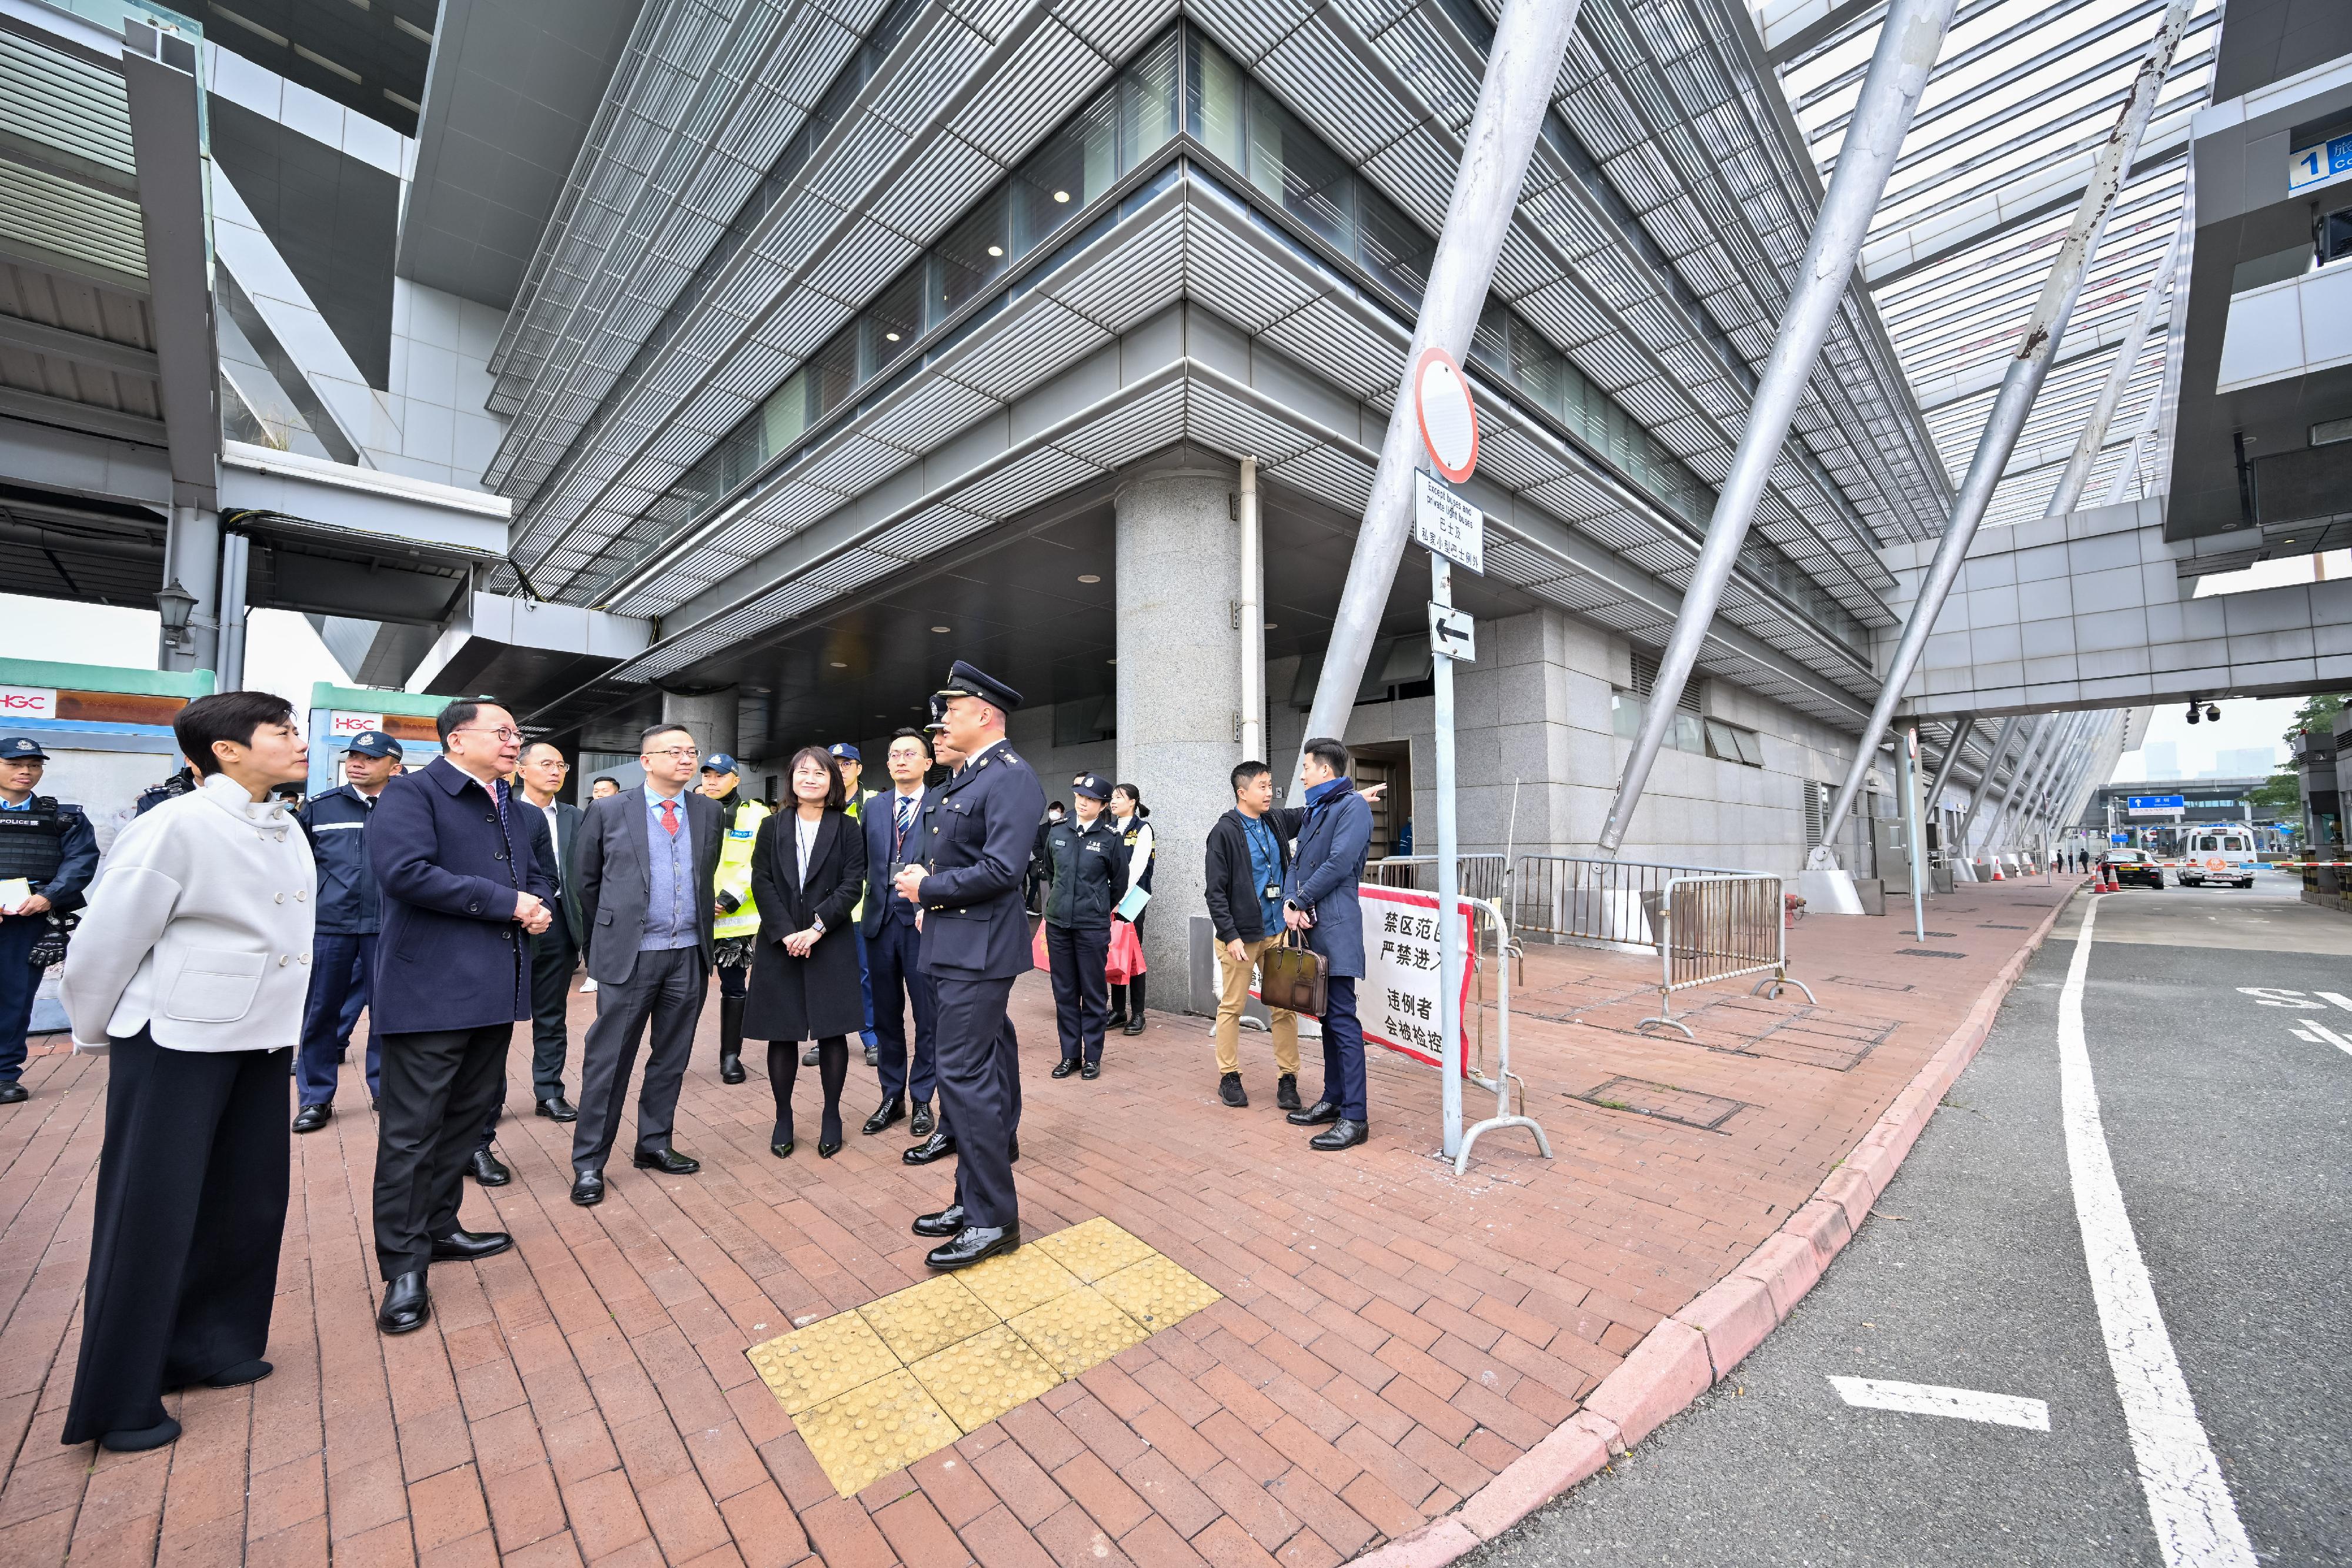 The Chief Secretary for Administration, Mr Chan Kwok-ki (second left), accompanied by the Commissioner of Customs and Excise, Ms Louise Ho (first left), and the Director of Immigration, Mr Benson Kwok (third left), visits the Shenzhen Bay Control Point to inspect its operations and receive a briefing from colleagues of the Immigration Department today (February 10), on the first day of the Lunar New Year. He also thanks all the colleagues who are on duty during the Lunar New Year holidays.